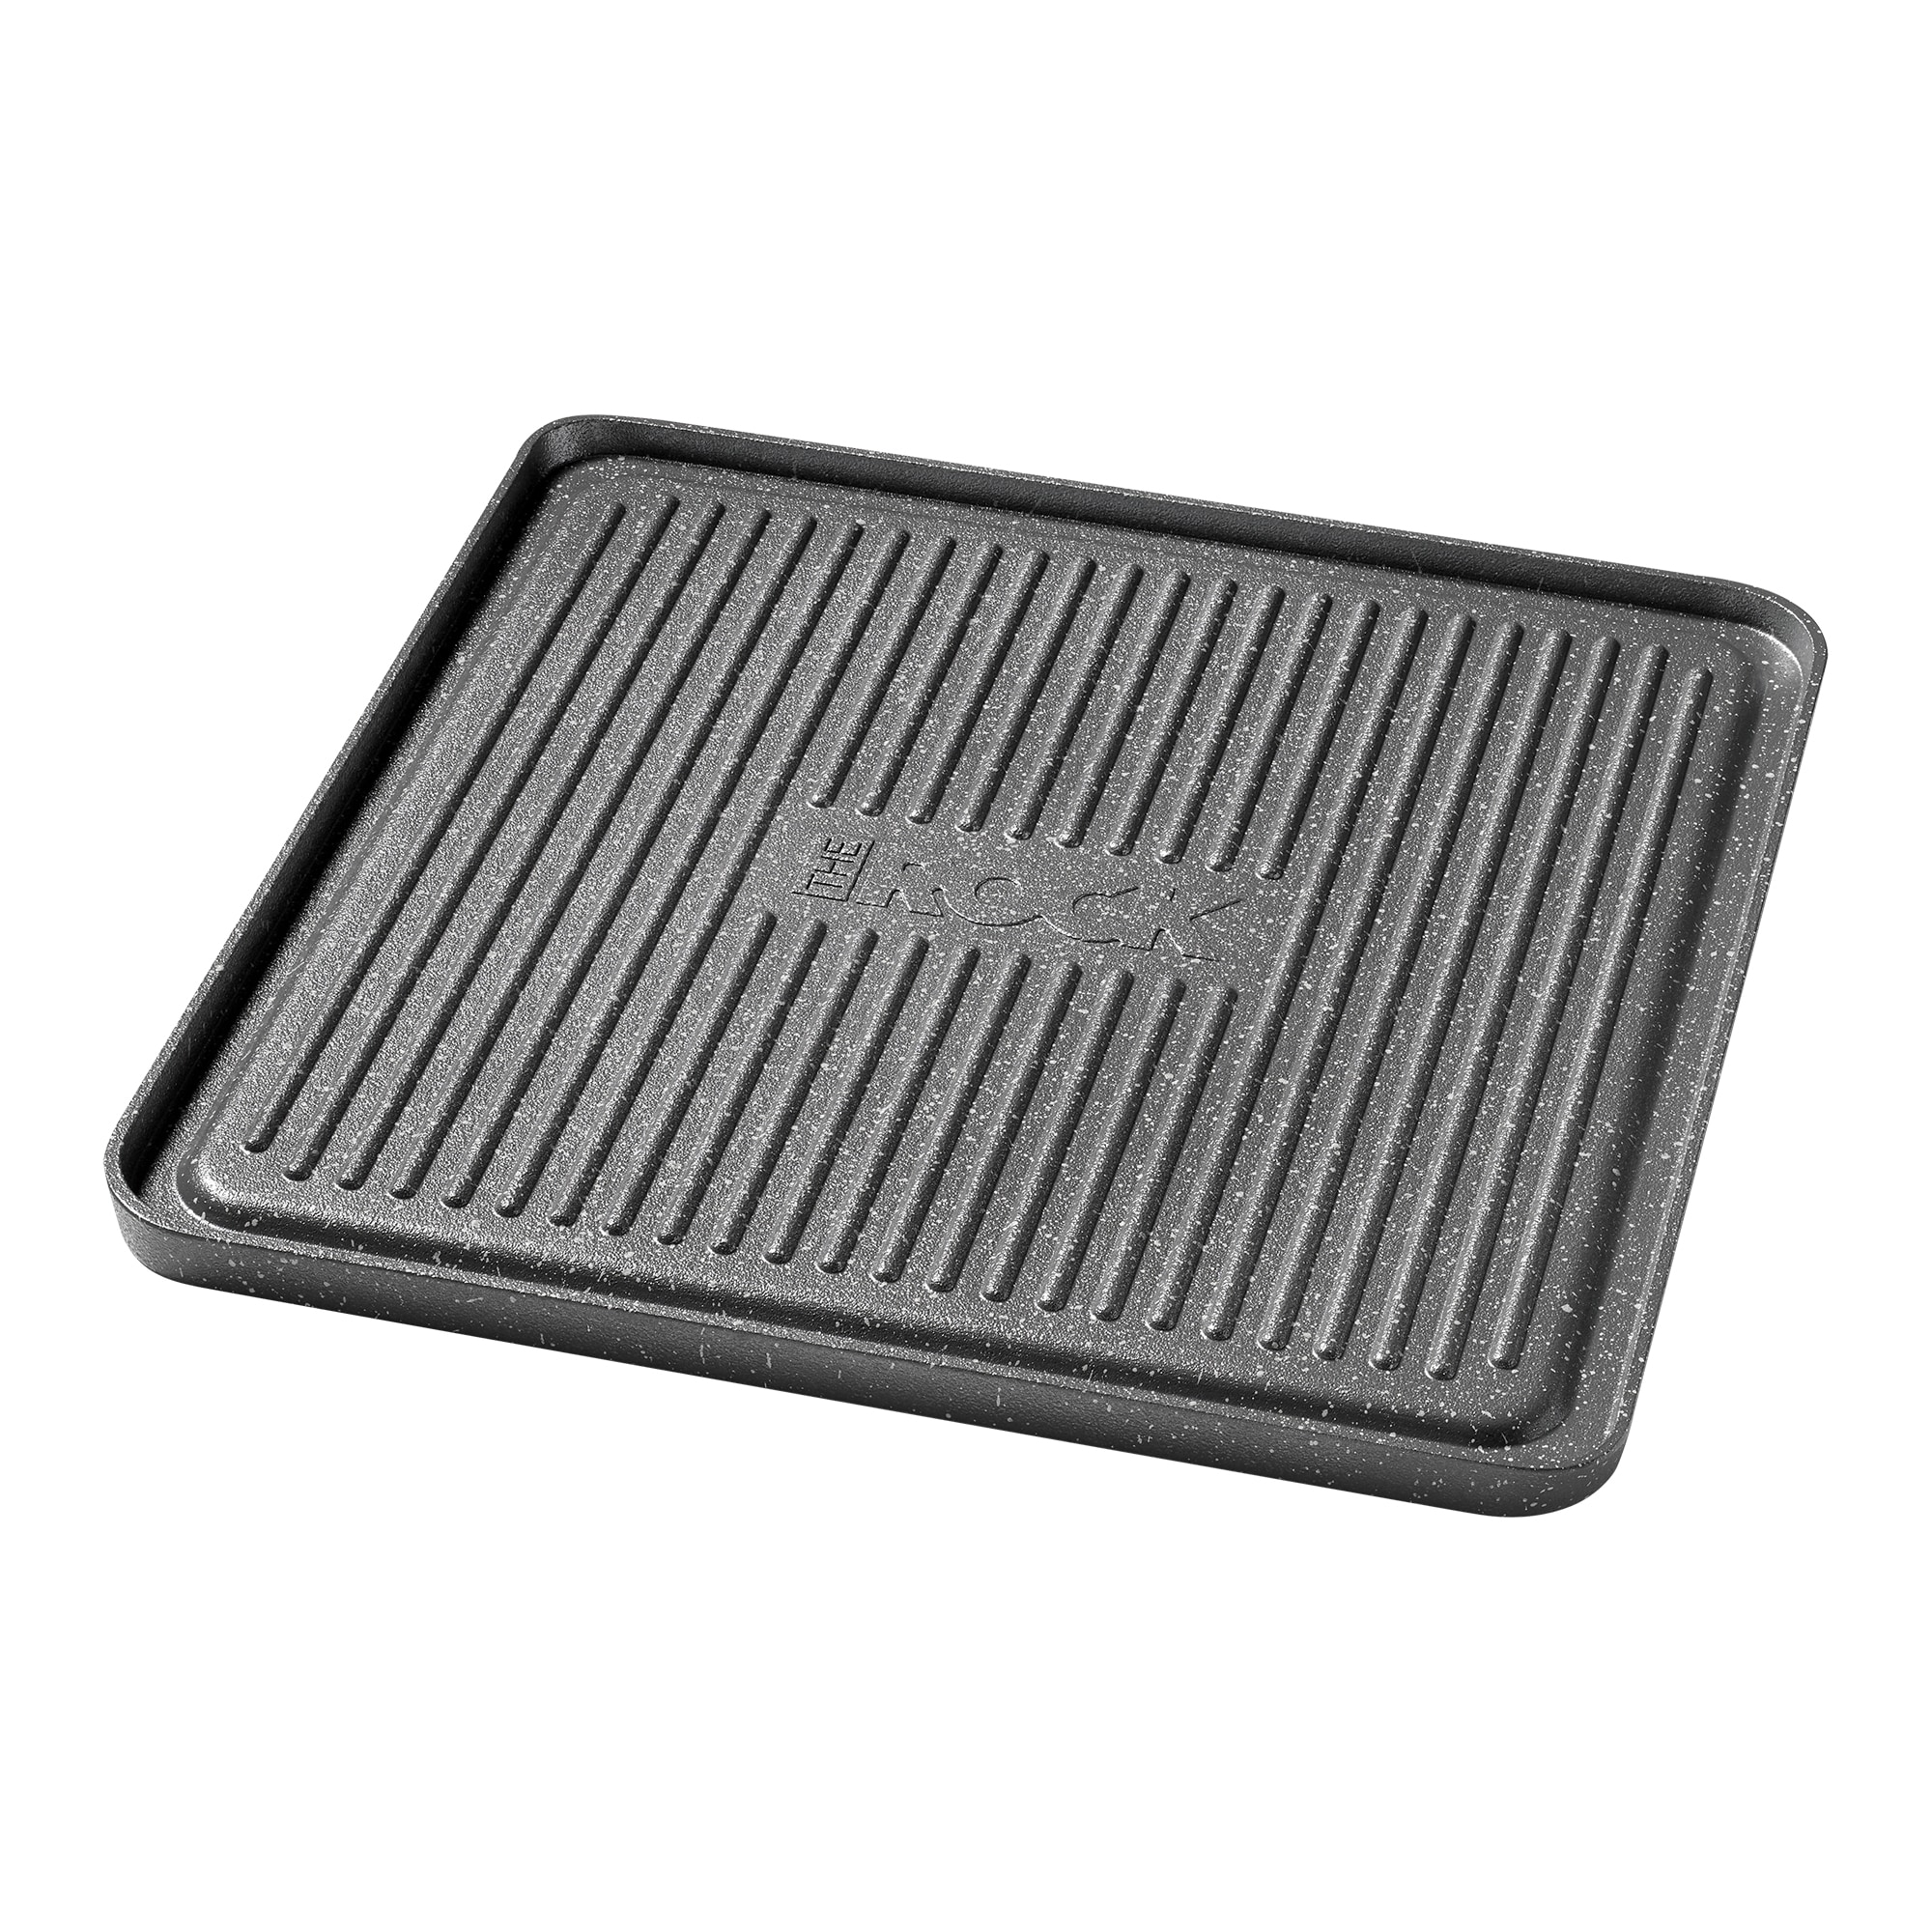  The Rock PRO Reversible Grill/Griddle Pan: Home & Kitchen